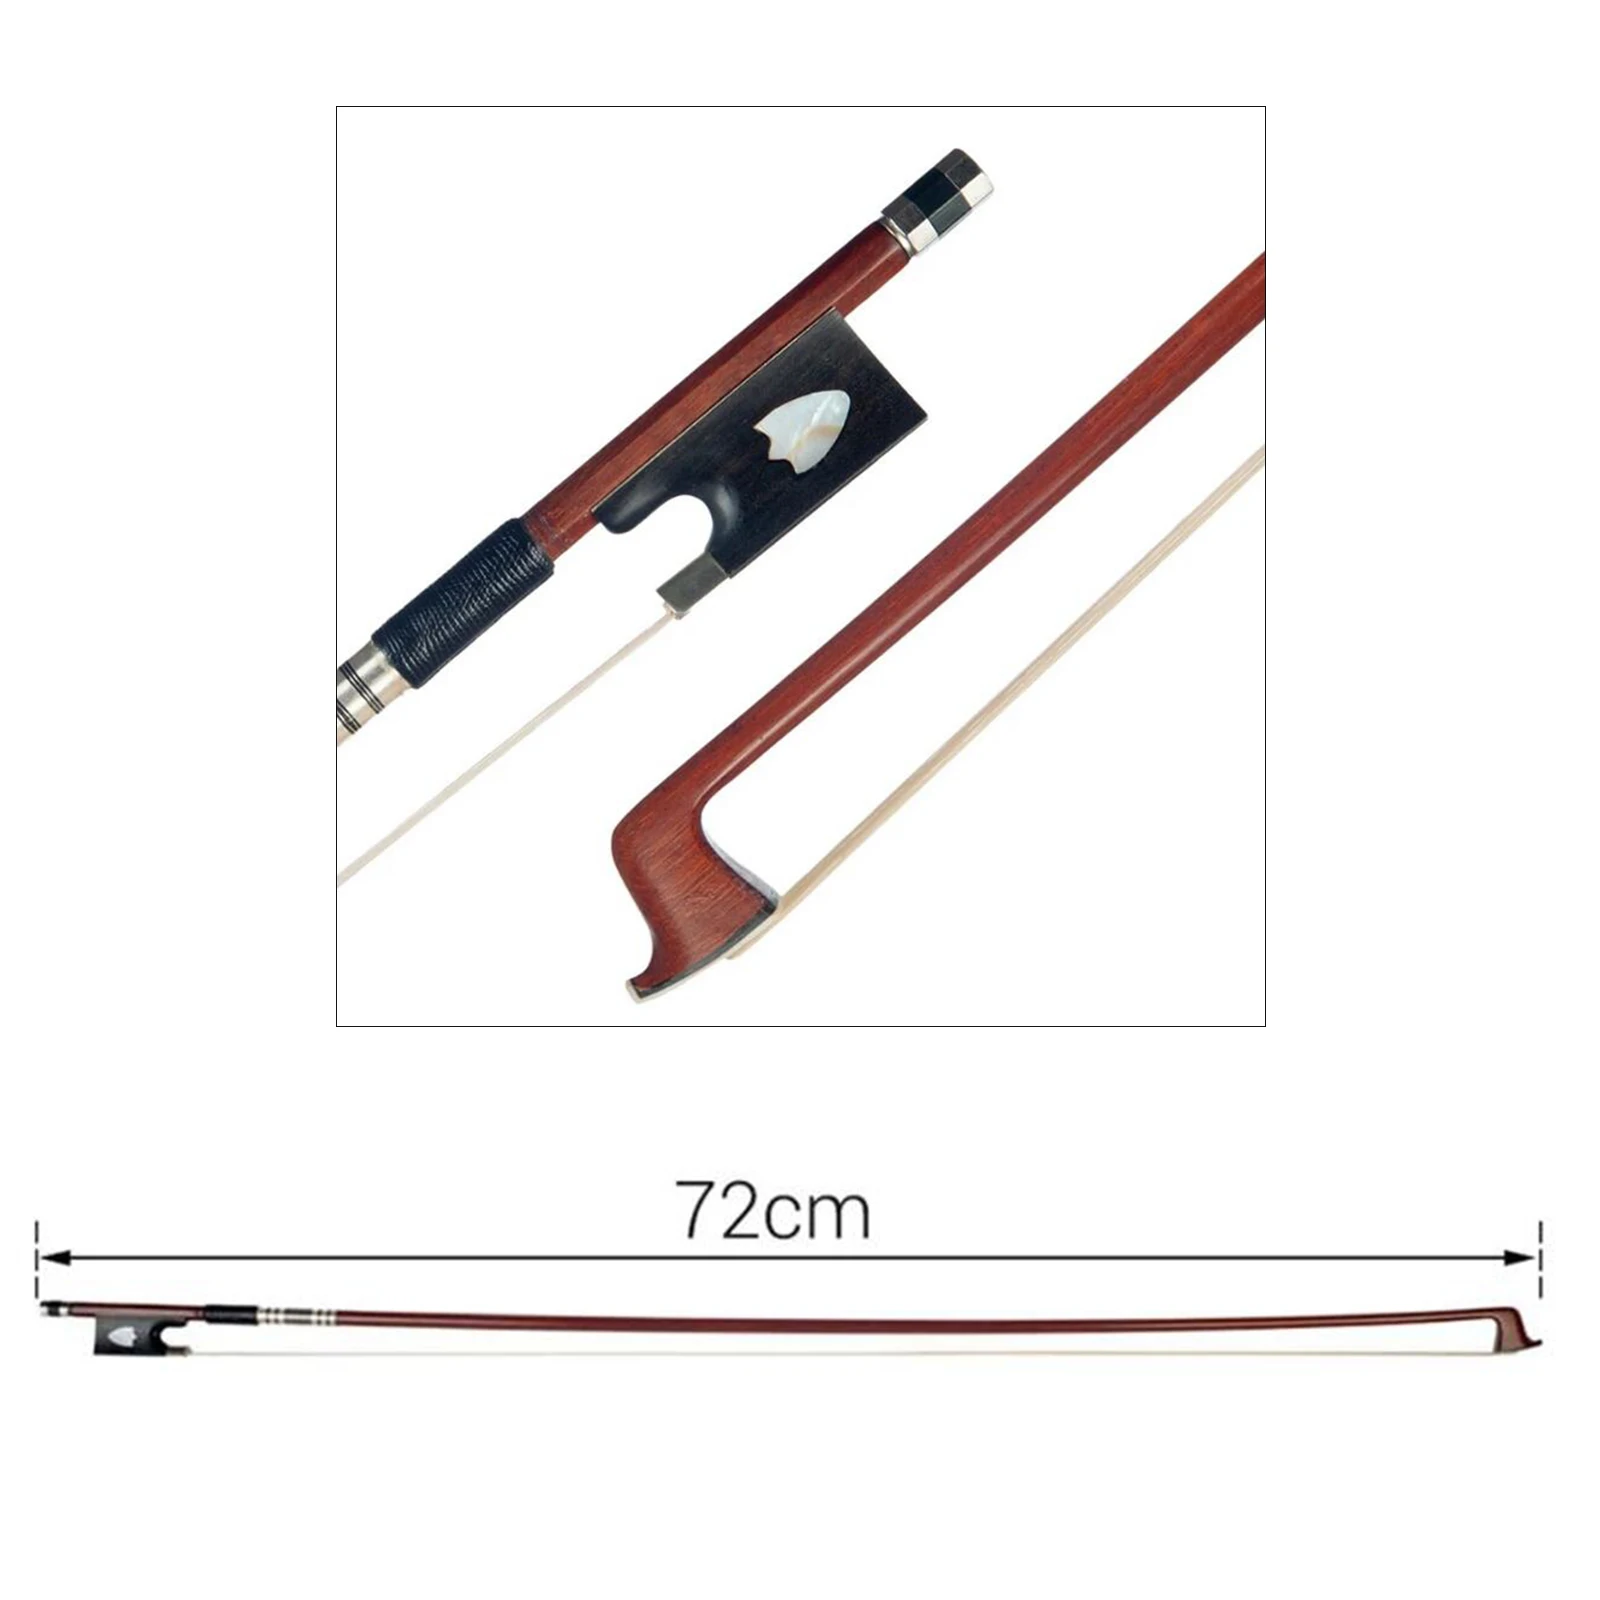 Handmade Brazilwood Violin Bow 4/4 Violin Bow Horse Hair Musical Intrument Parts for Kids Adults Gift